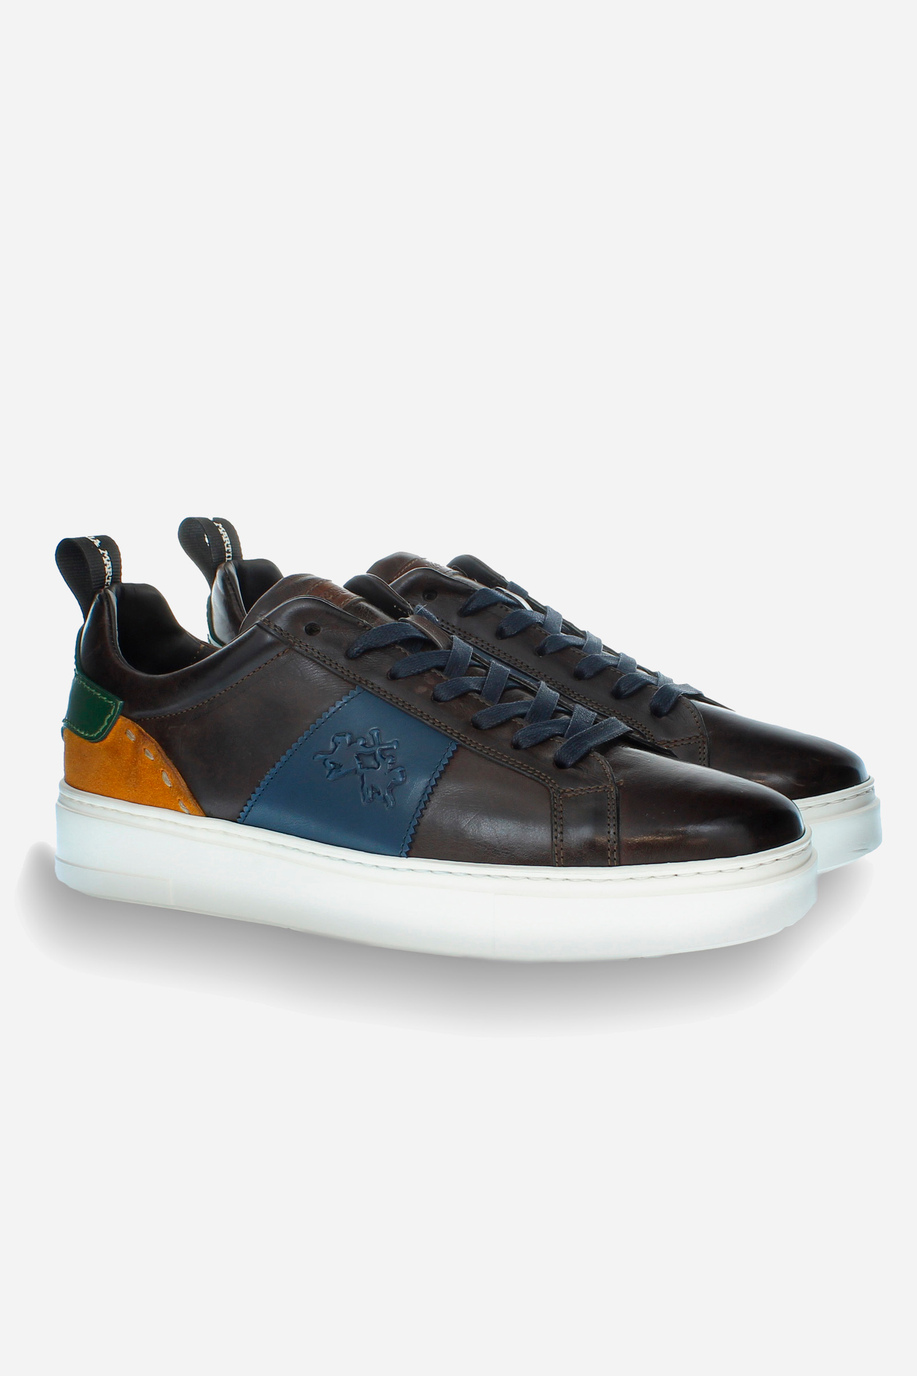 Men’s sneaker in a mix of calfskin and suede - Sneakers | La Martina - Official Online Shop